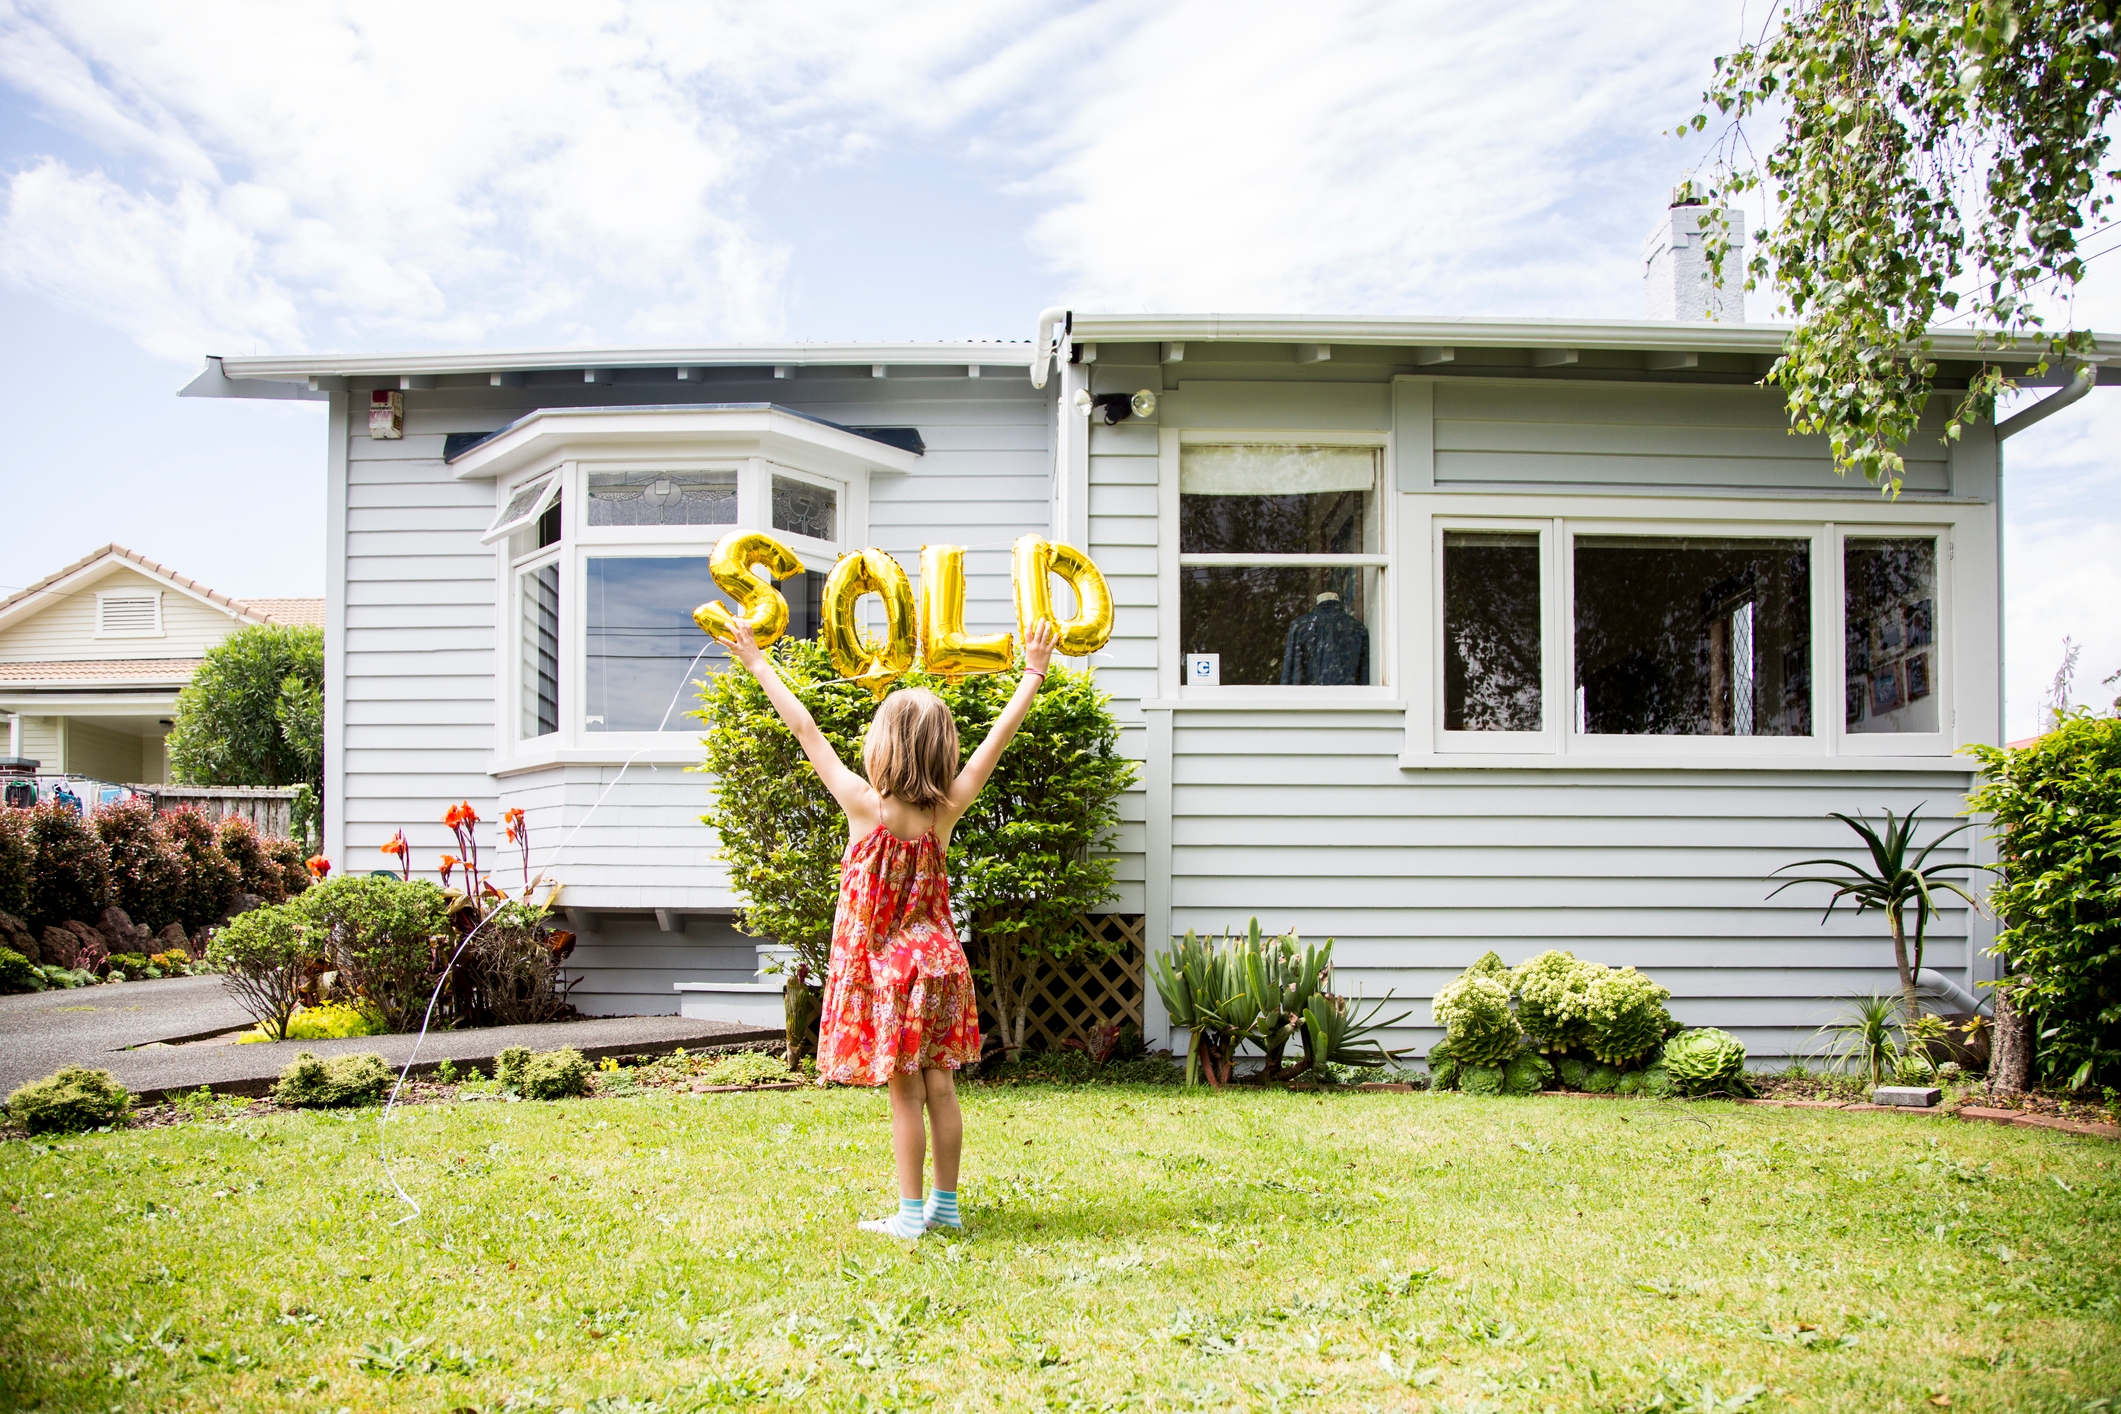 Little girl holds up gold balloons that read 'SOLD' in front of a house